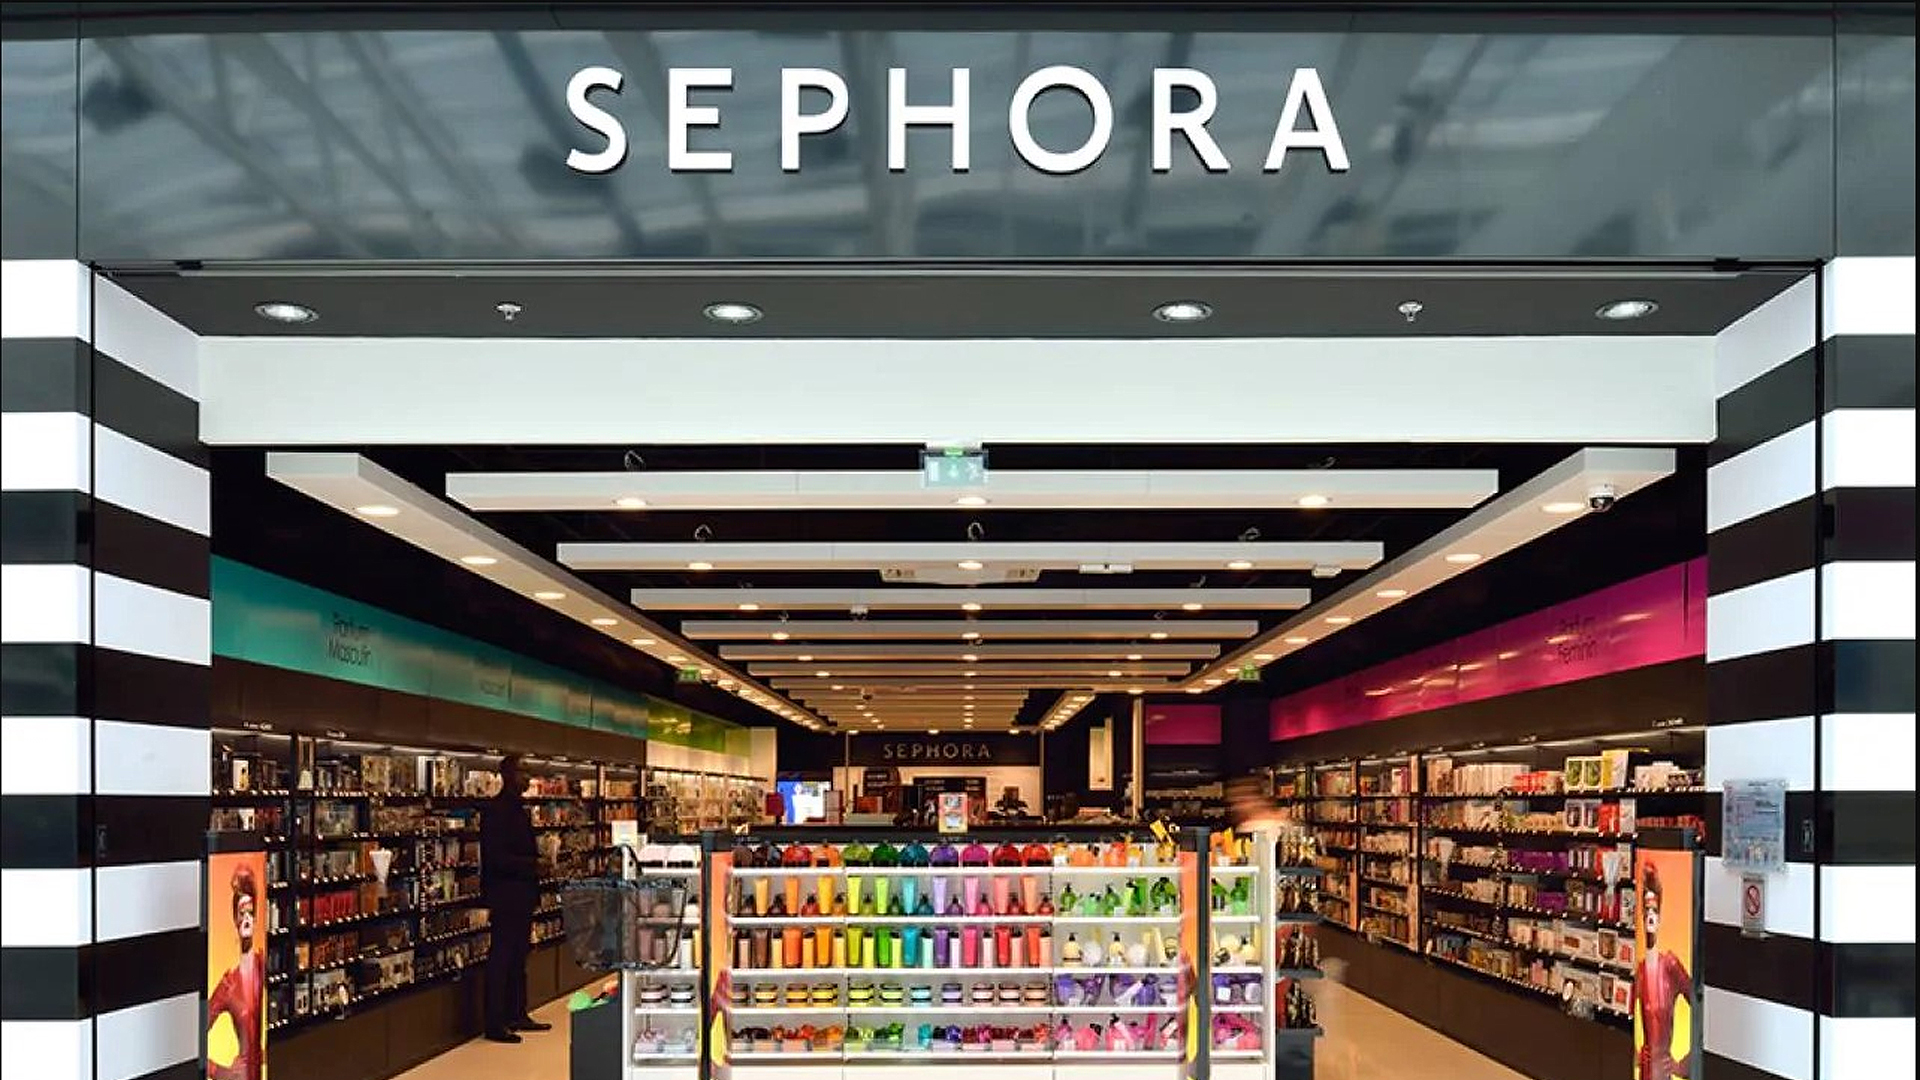 Sephora is opening a second UK store - The Mail